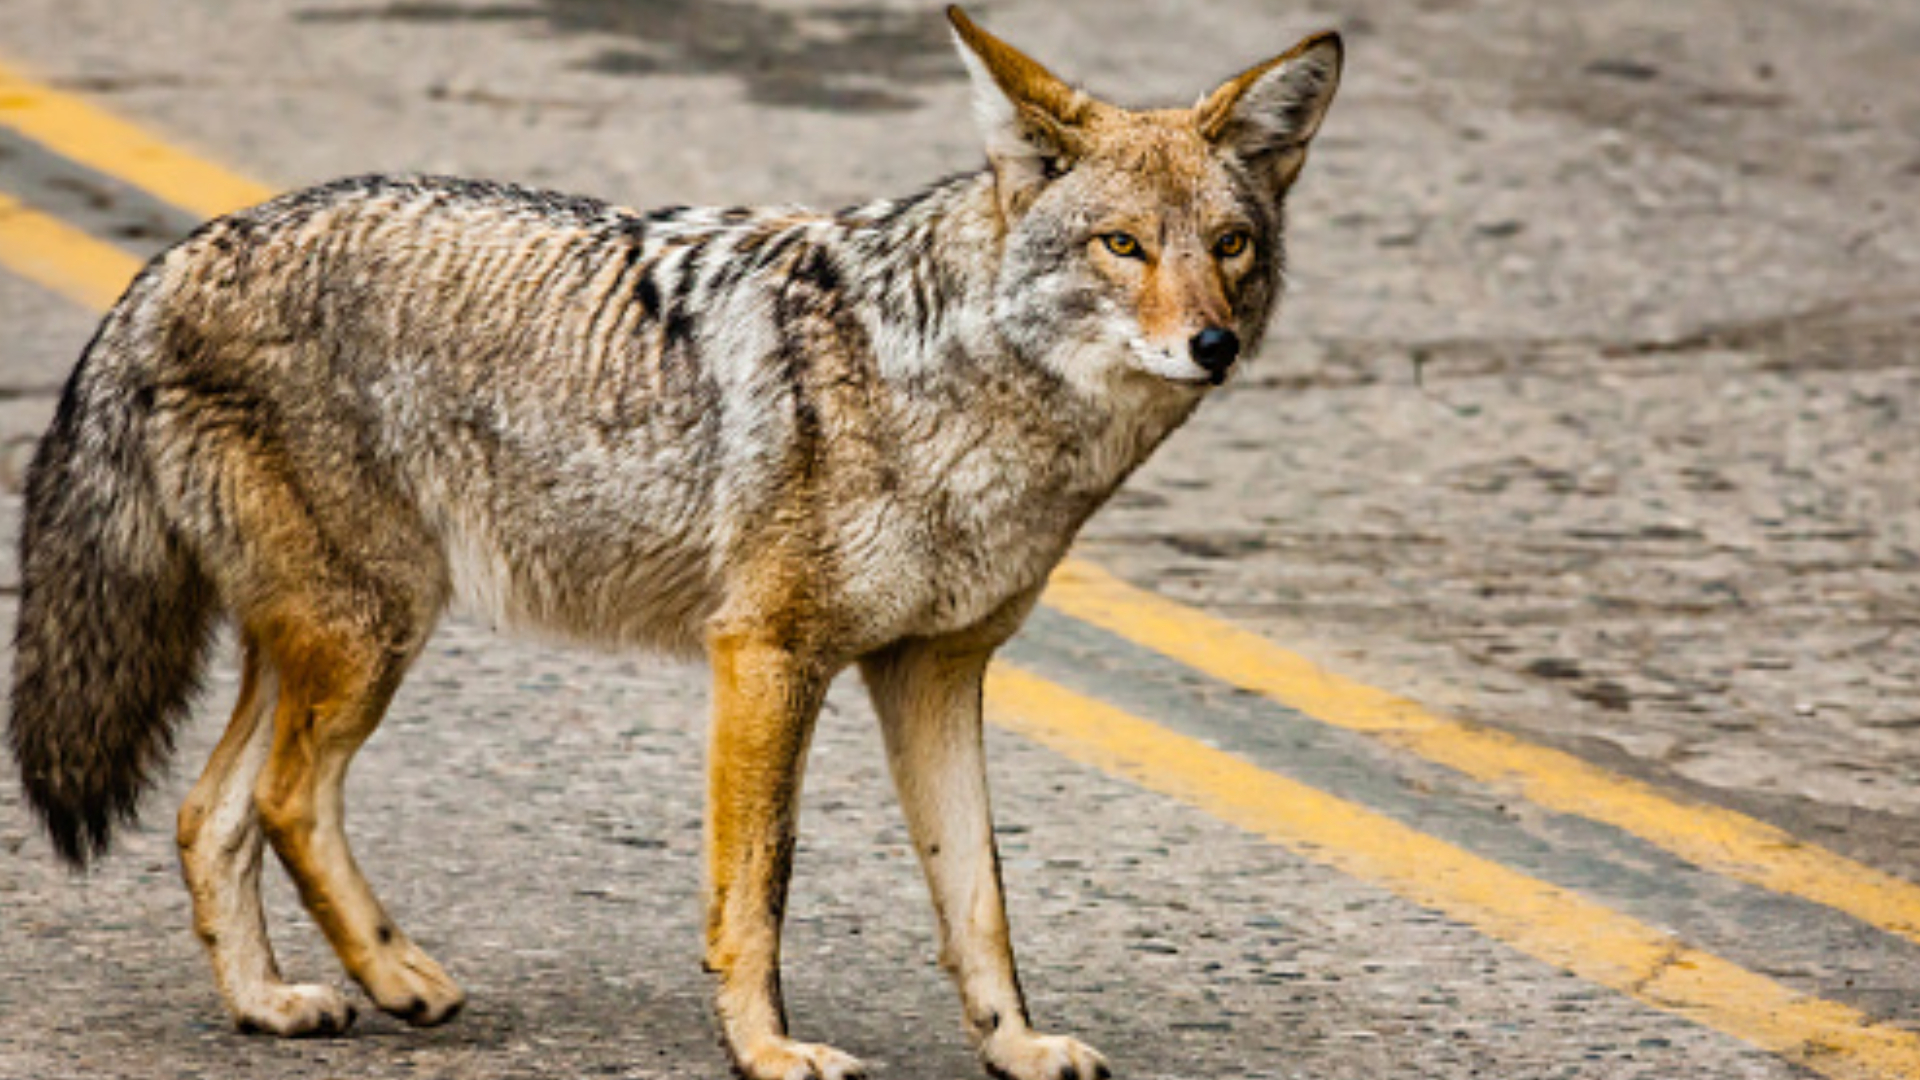 Here's what to do if you encounter a coyote